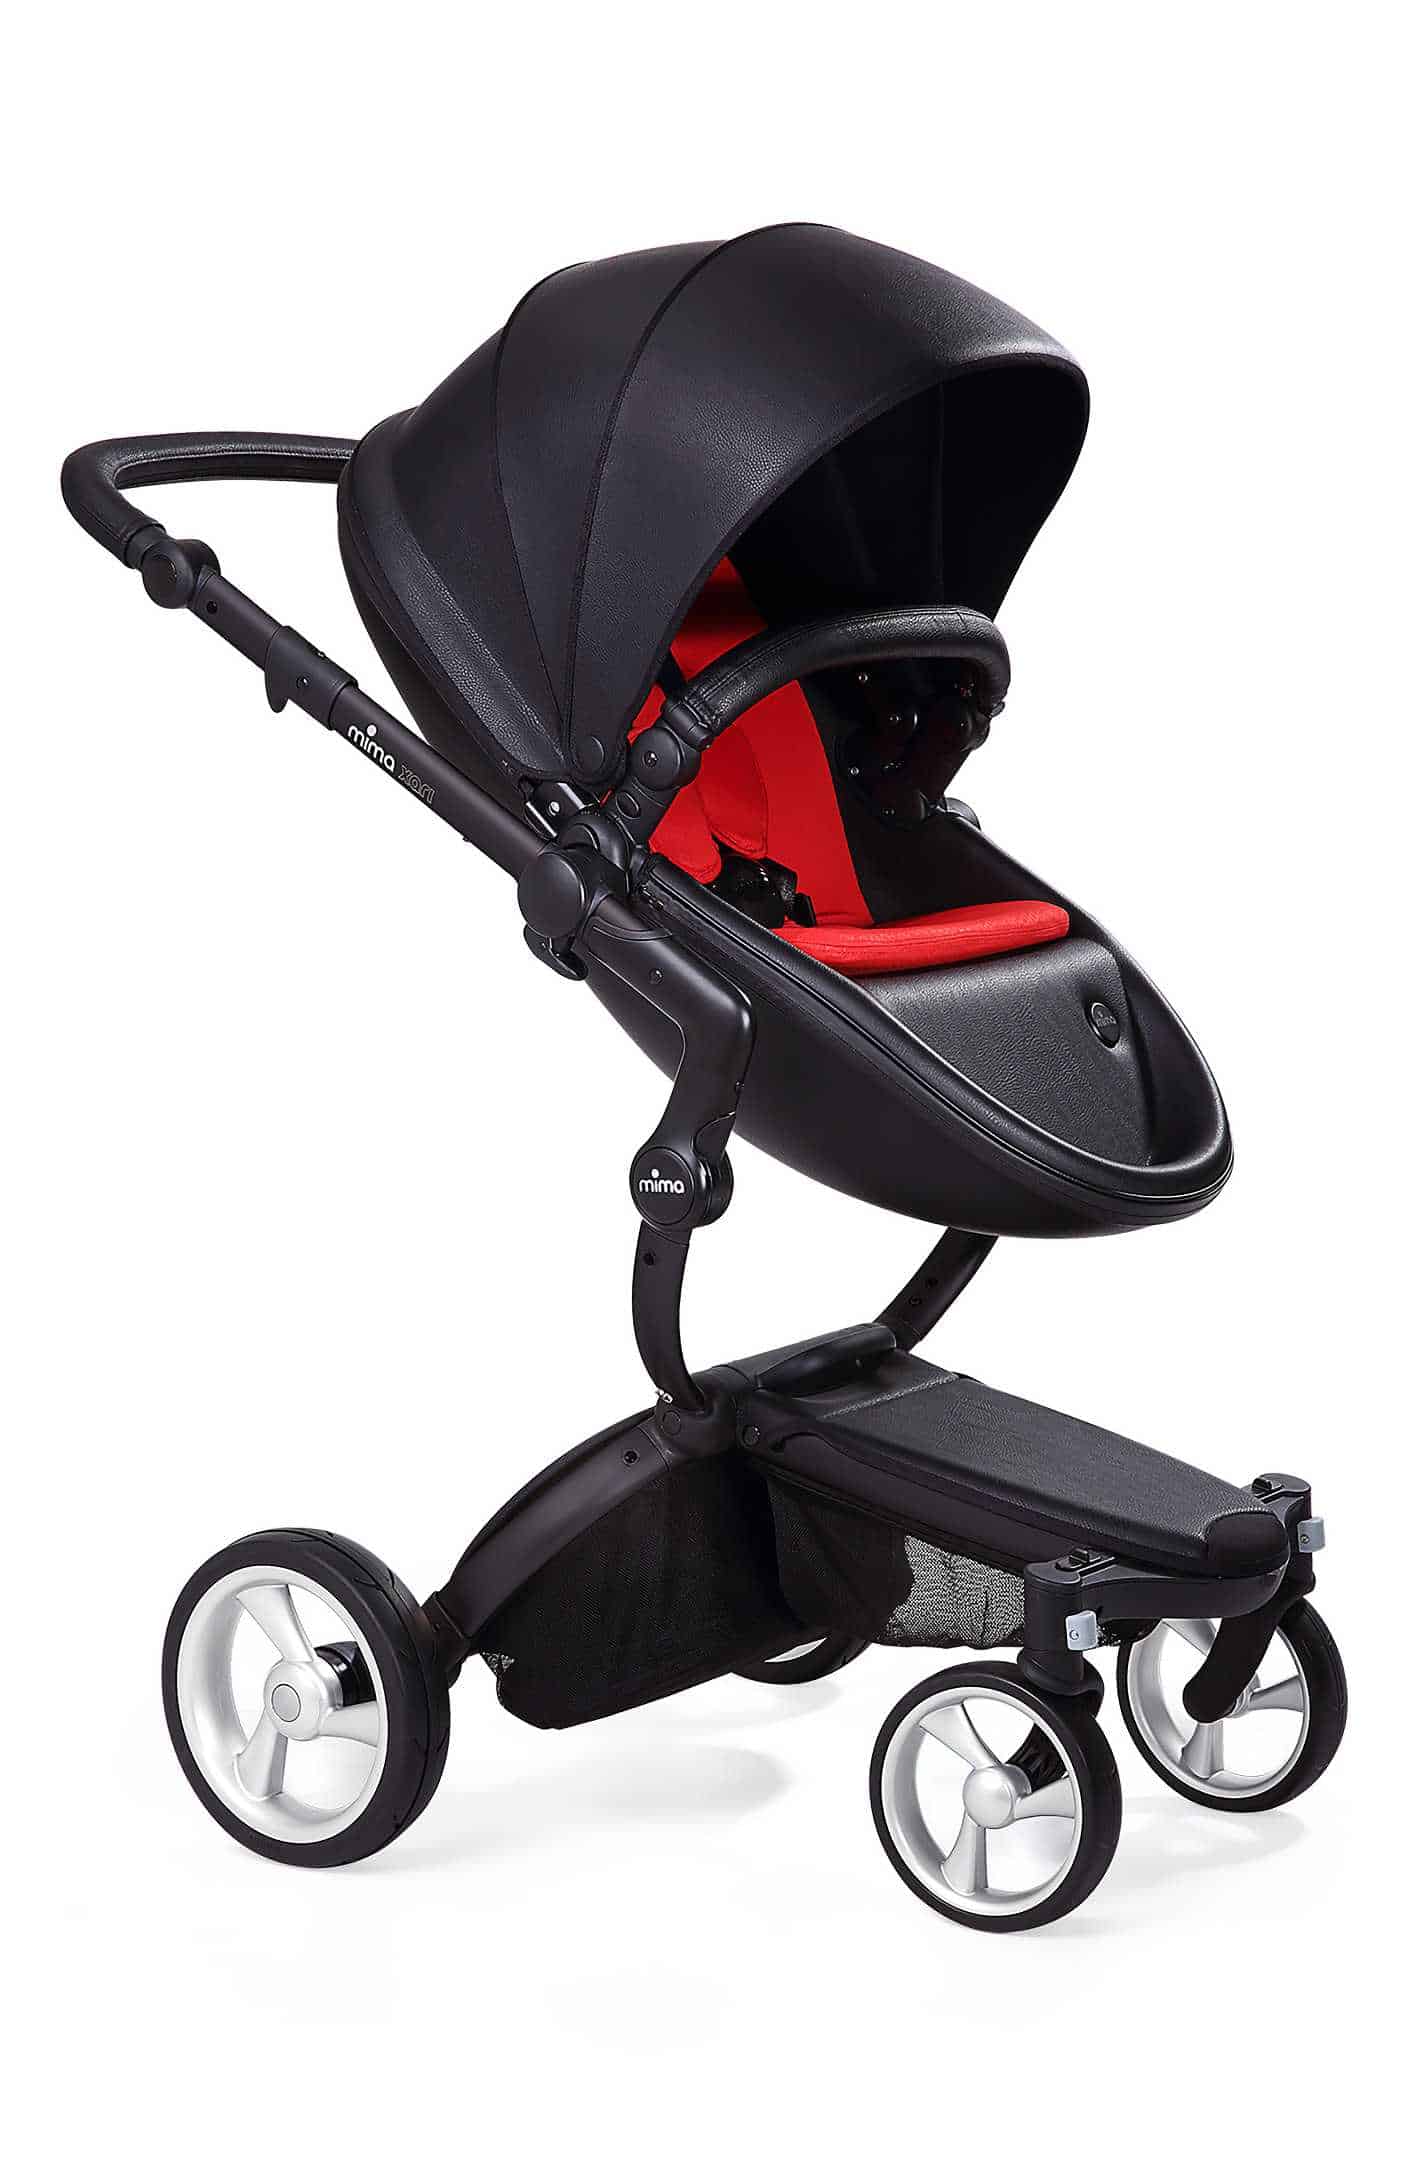 mima stroller review